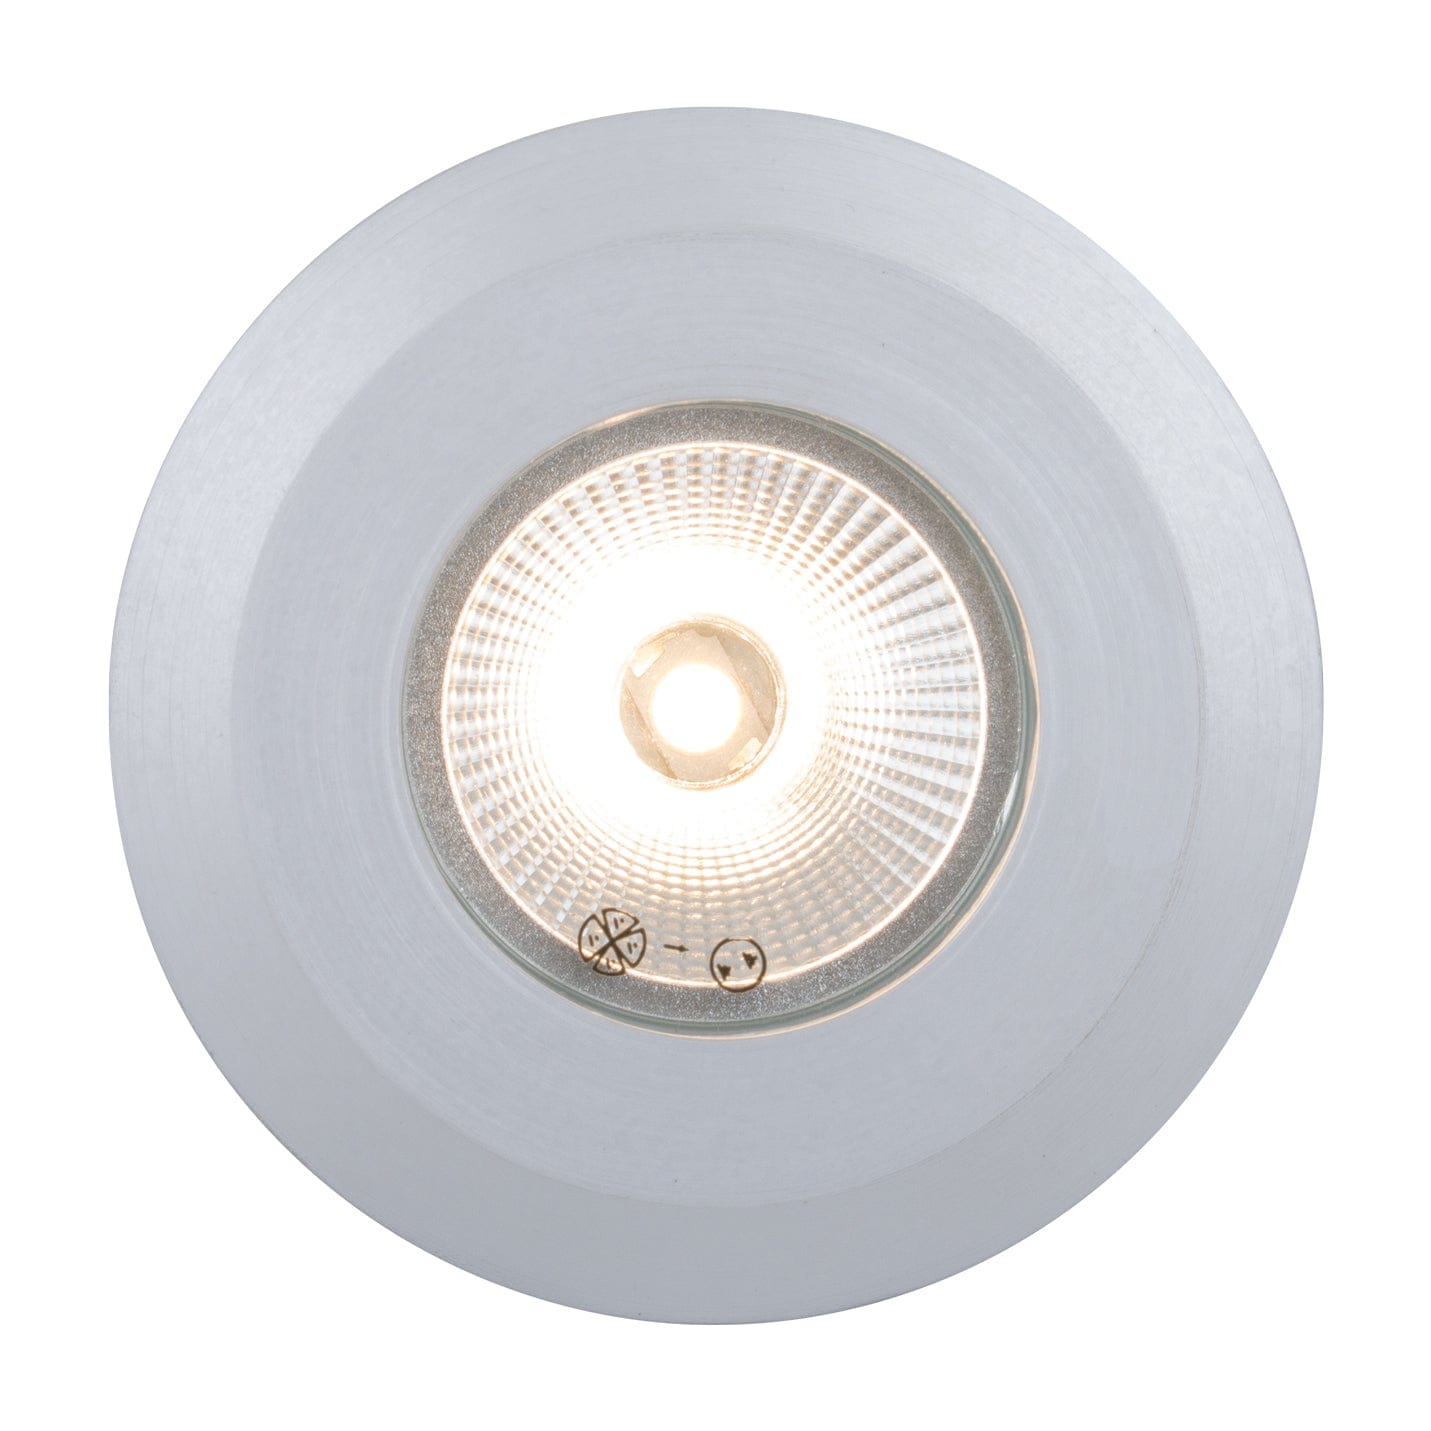 Domus Lighting Step Lights Aluminium / Round DEKA-COVER Eyelid Round & Square Cover Lights-For-You 19424